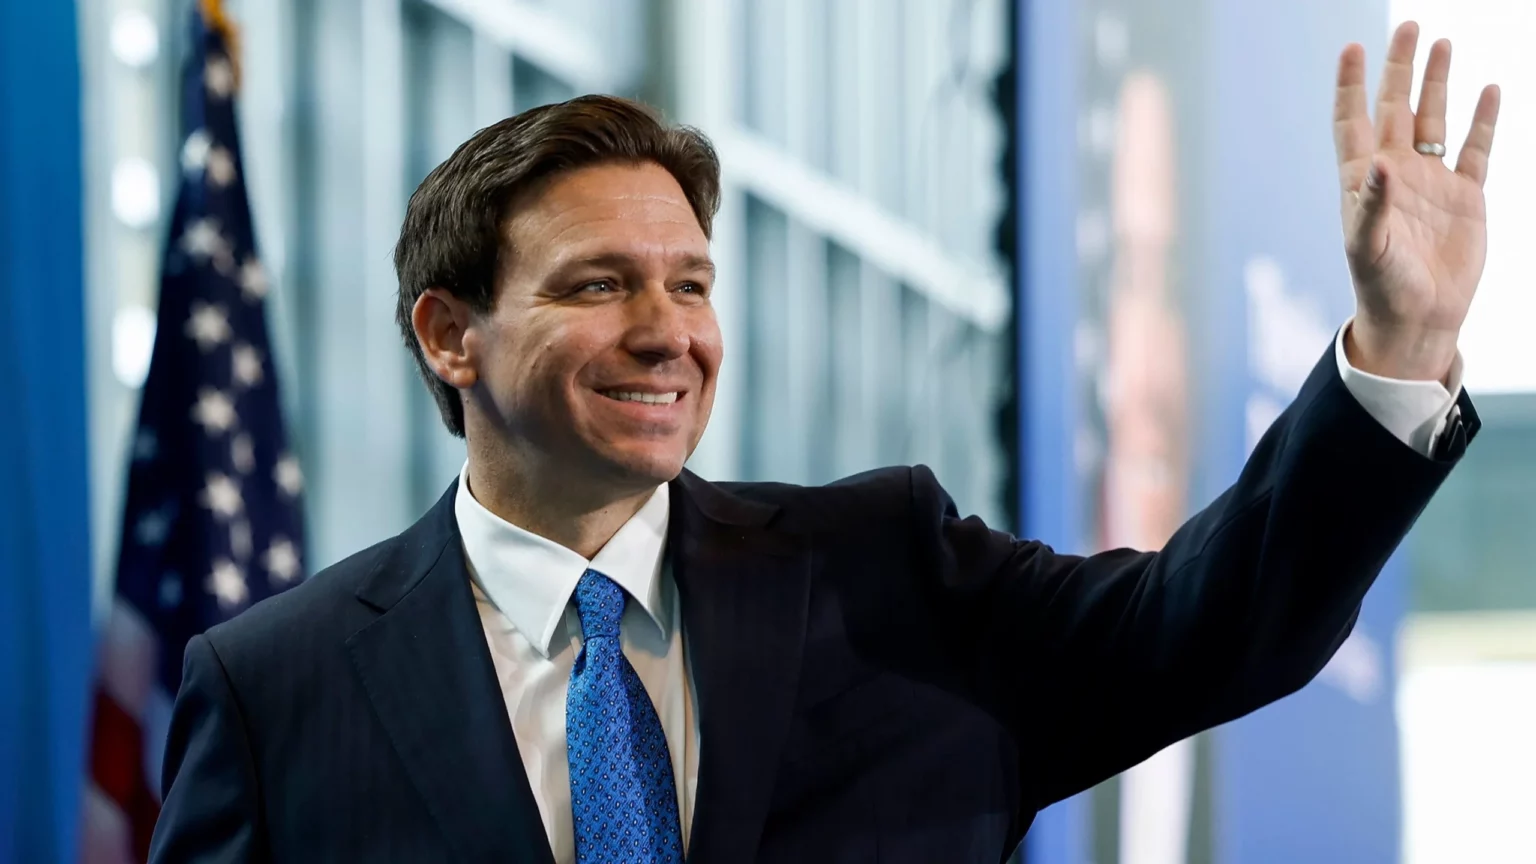 ron-desantis-announces-2024-presidential-bid-in-twitter-spaces-event-hosted-by-elon-musk